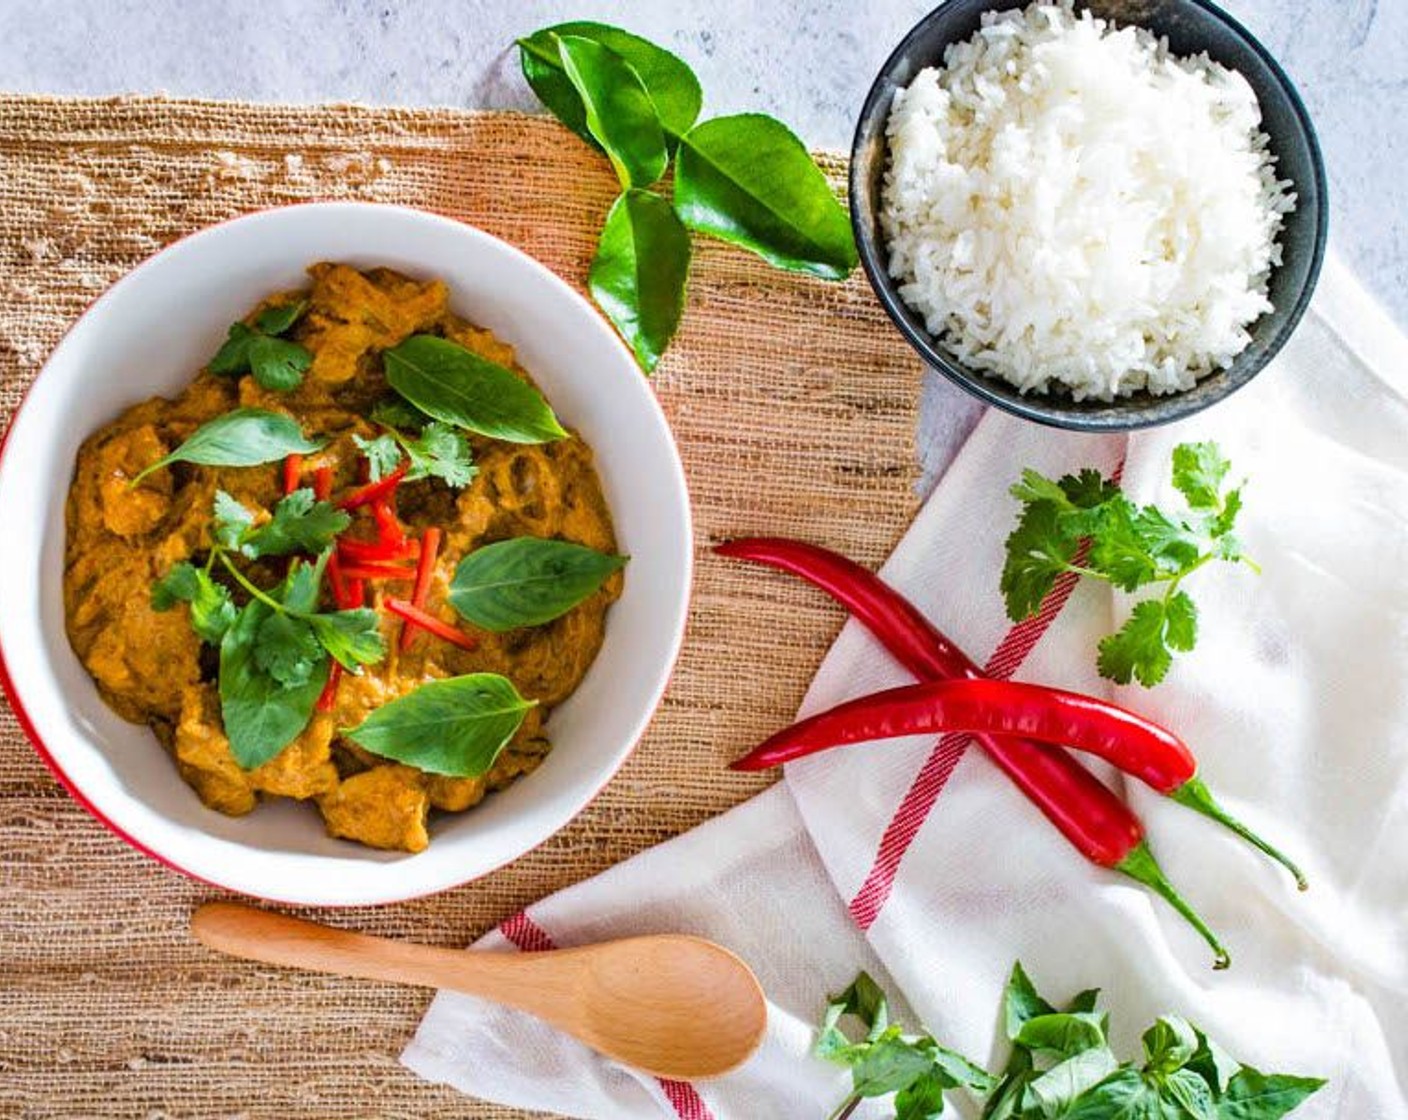 step 9 Transfer the curry into a bowl, then garnish with fresh sliced Red Chili Pepper (1), Fresh Cilantro Leaf (1/2 cup) and Fresh Thai Basil Leaves (1 cup). Serve with steamed rice. Enjoy!